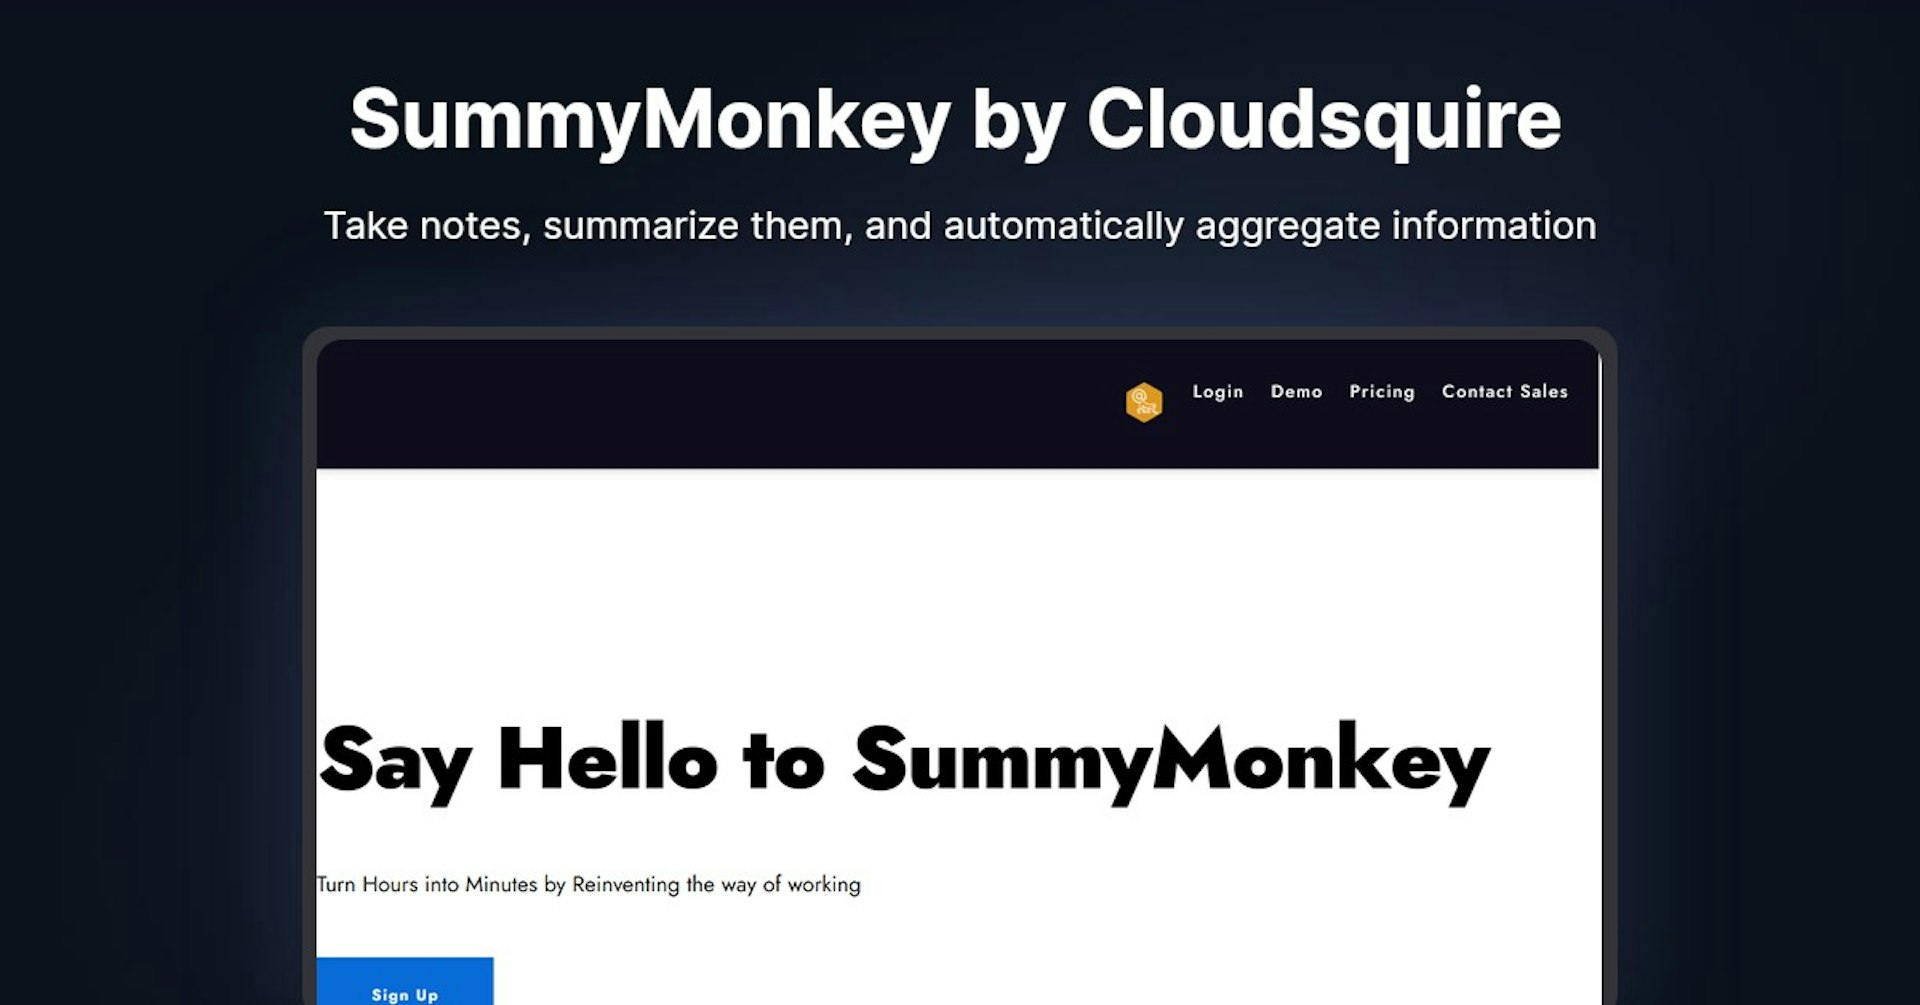 SummyMonkey by Cloudsquire